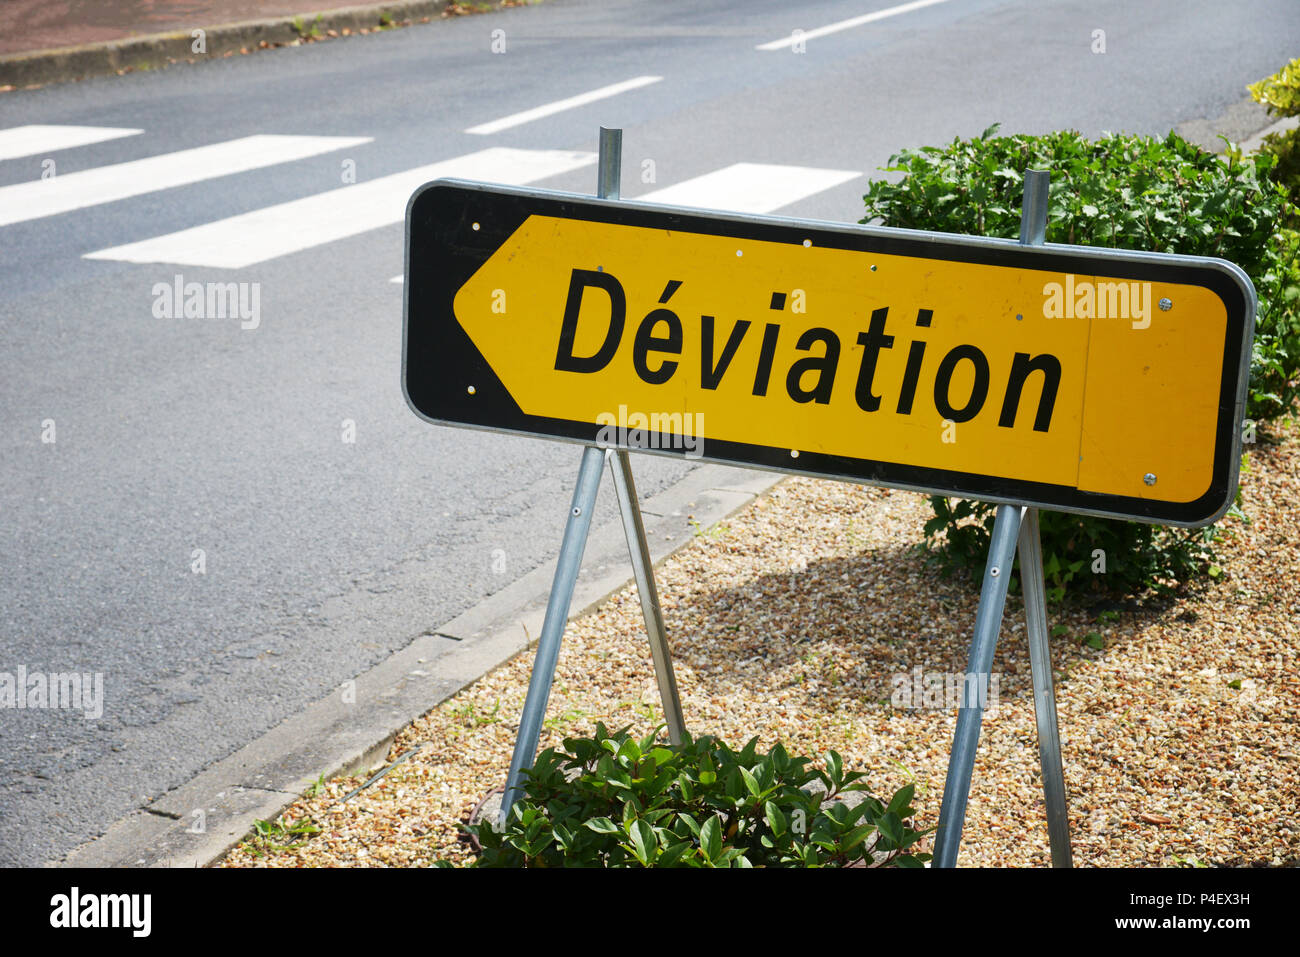 All the local village roads were being replaced in Roézé-sur-Sarthe, Pays-de-la-Loire in north-western France. Stock Photo